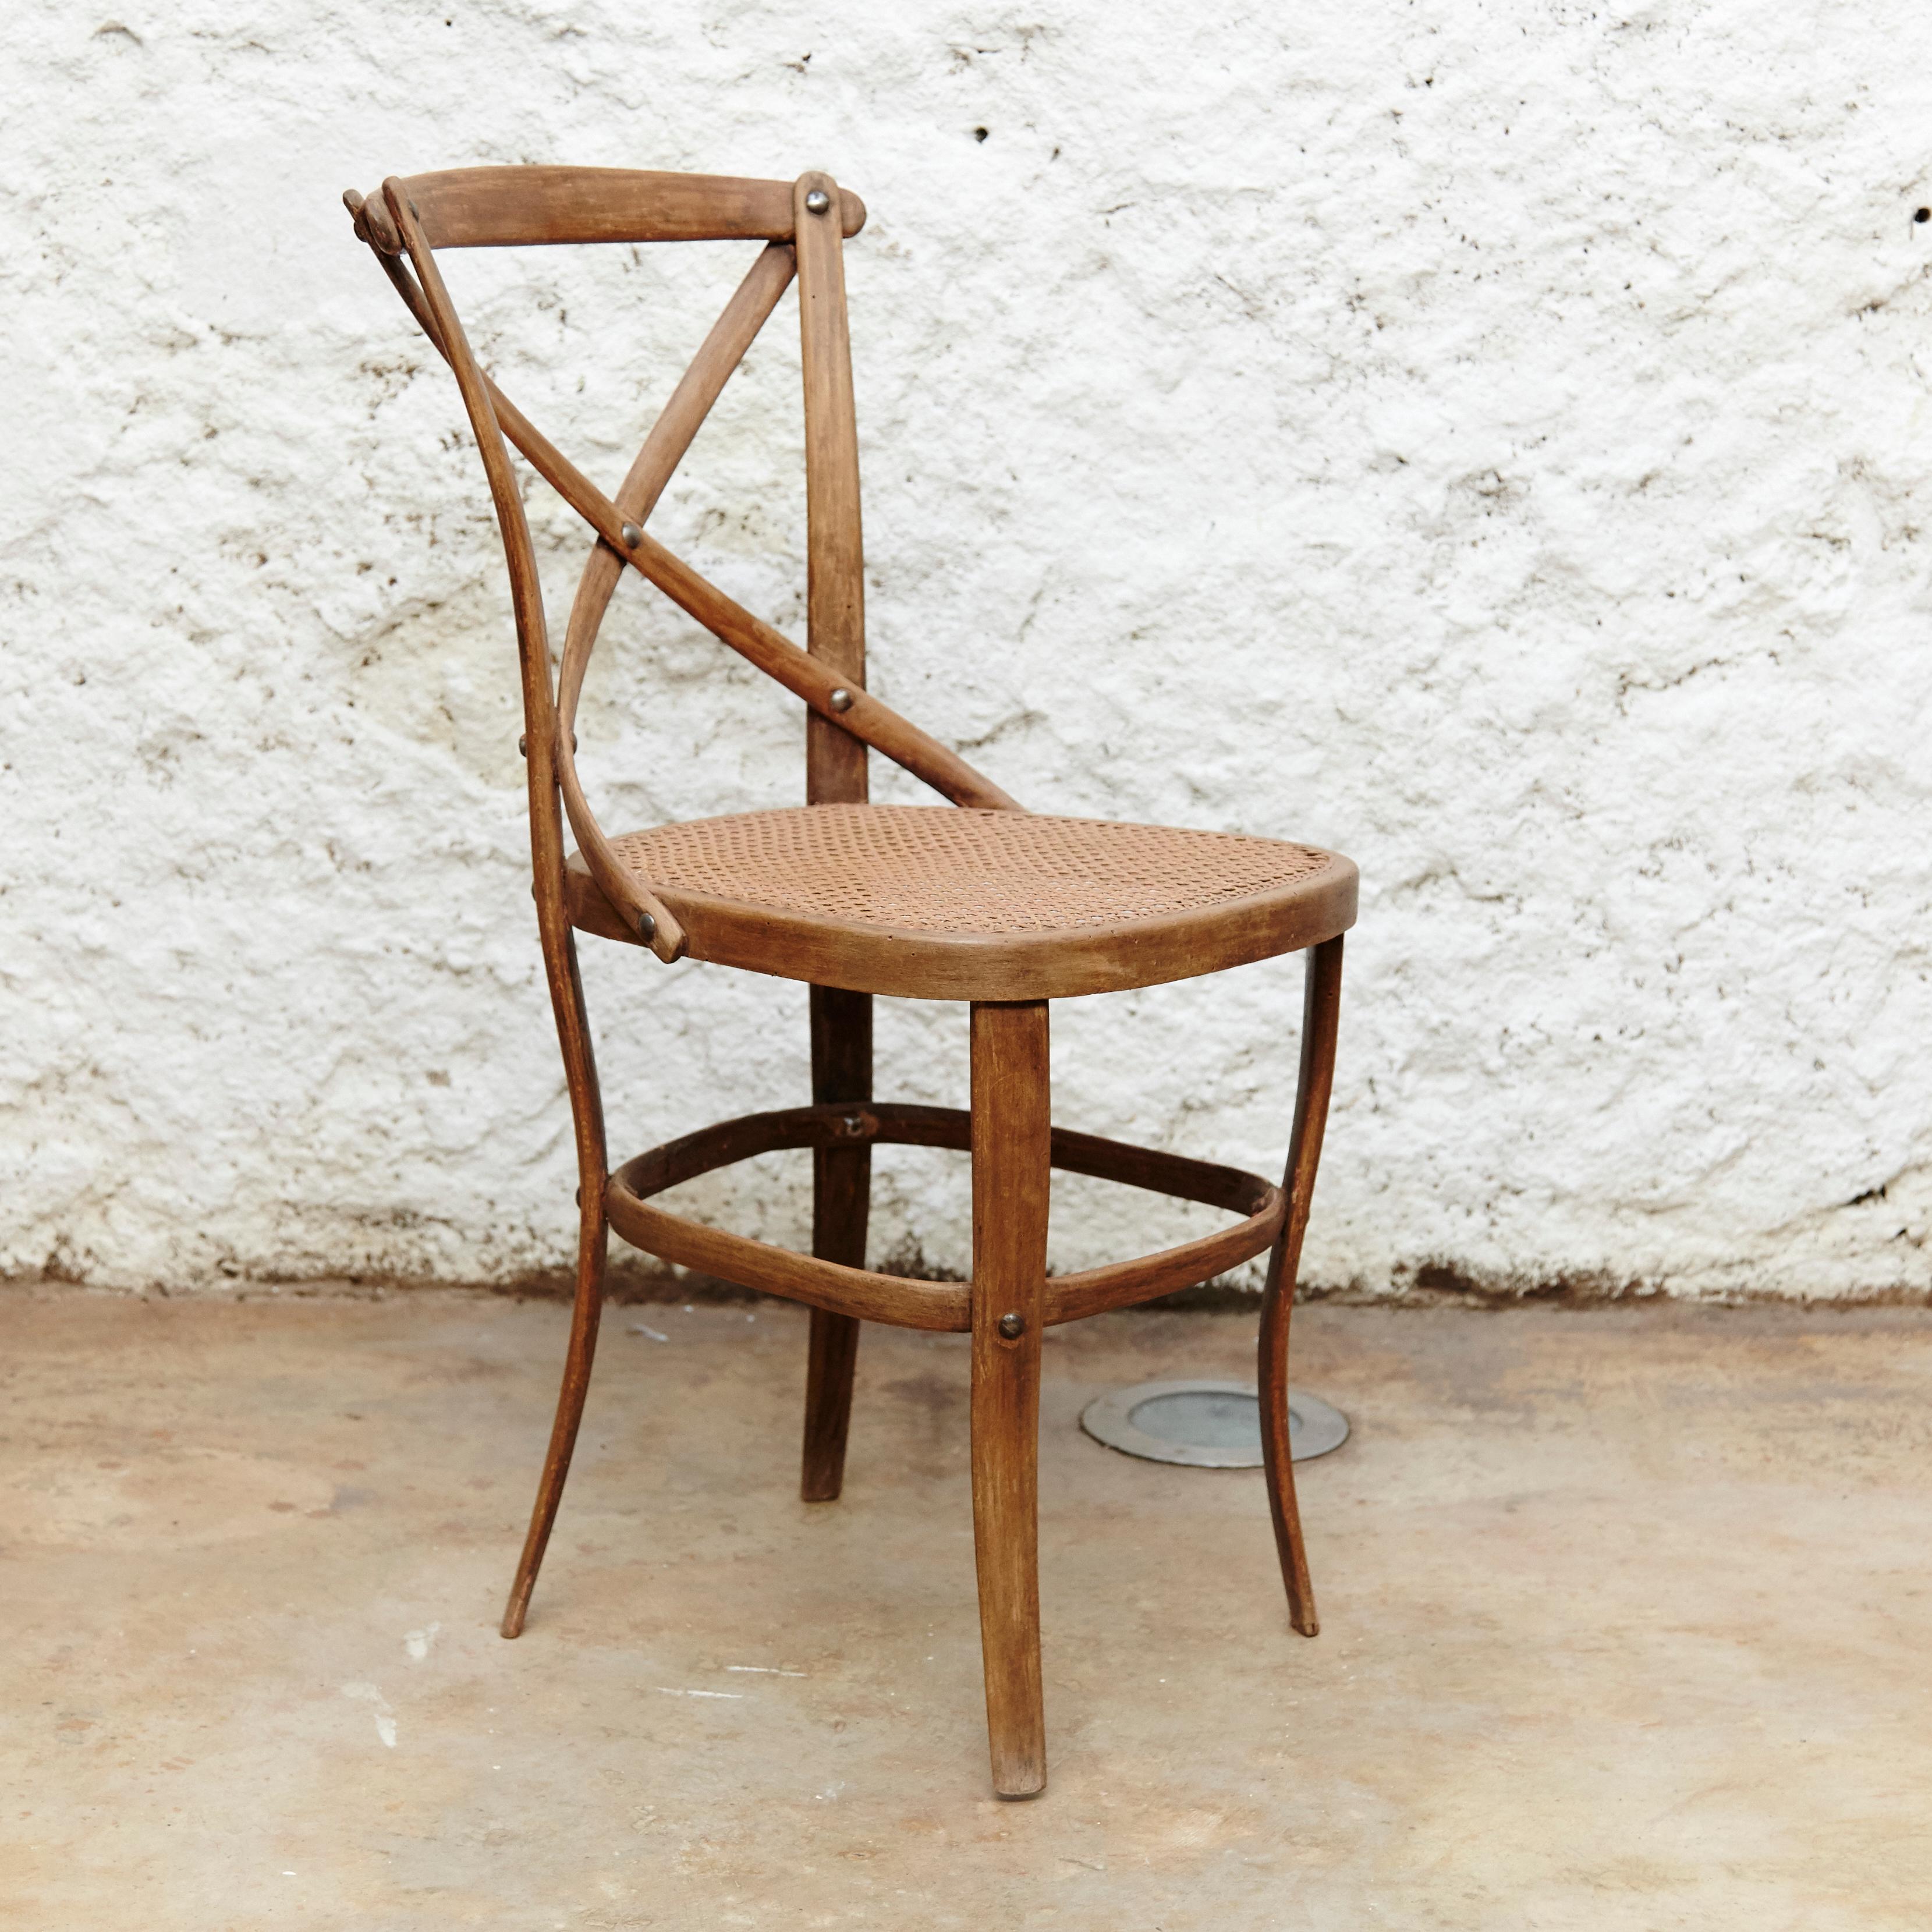 Thonet chair model number 91, manufactured by Thonet, circa 1920. 
Designed by August Thonet.

It preserves the original label to the underside. 

In original condition, with minor wear consistent with age and use, preserving a beautiful